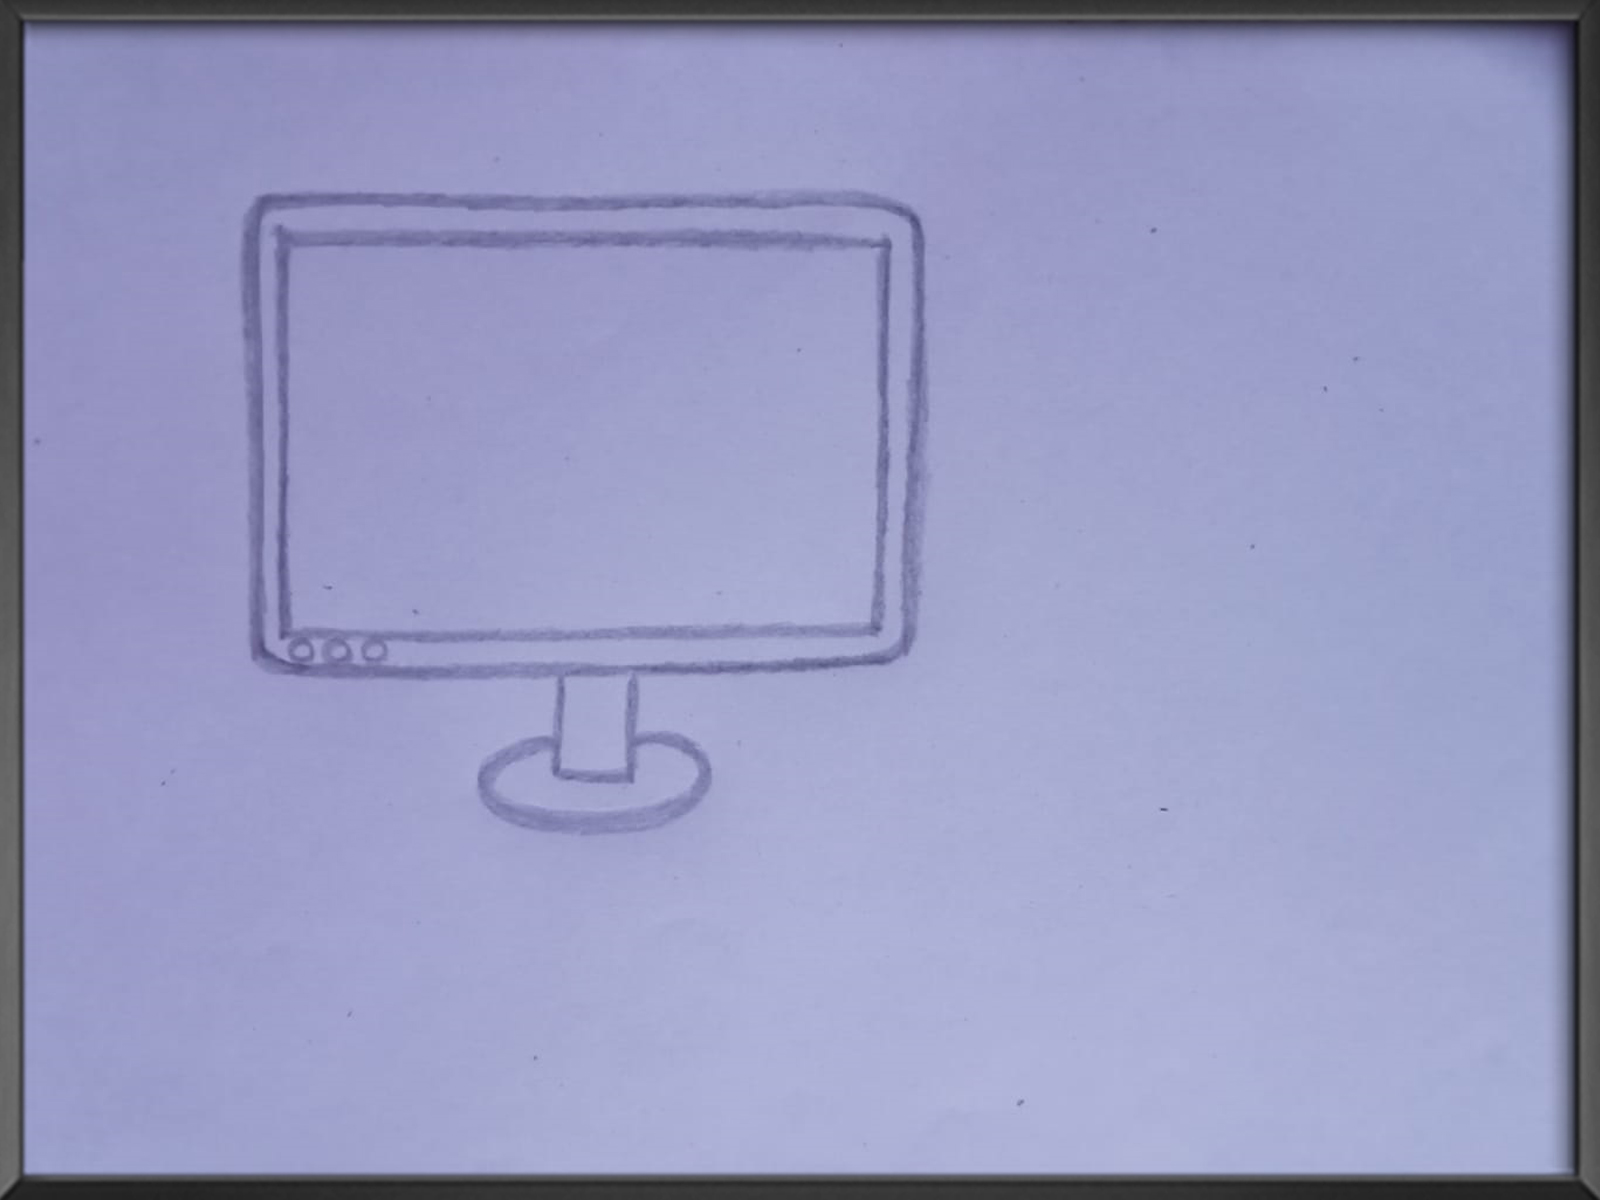 Old monitor drawing free image download